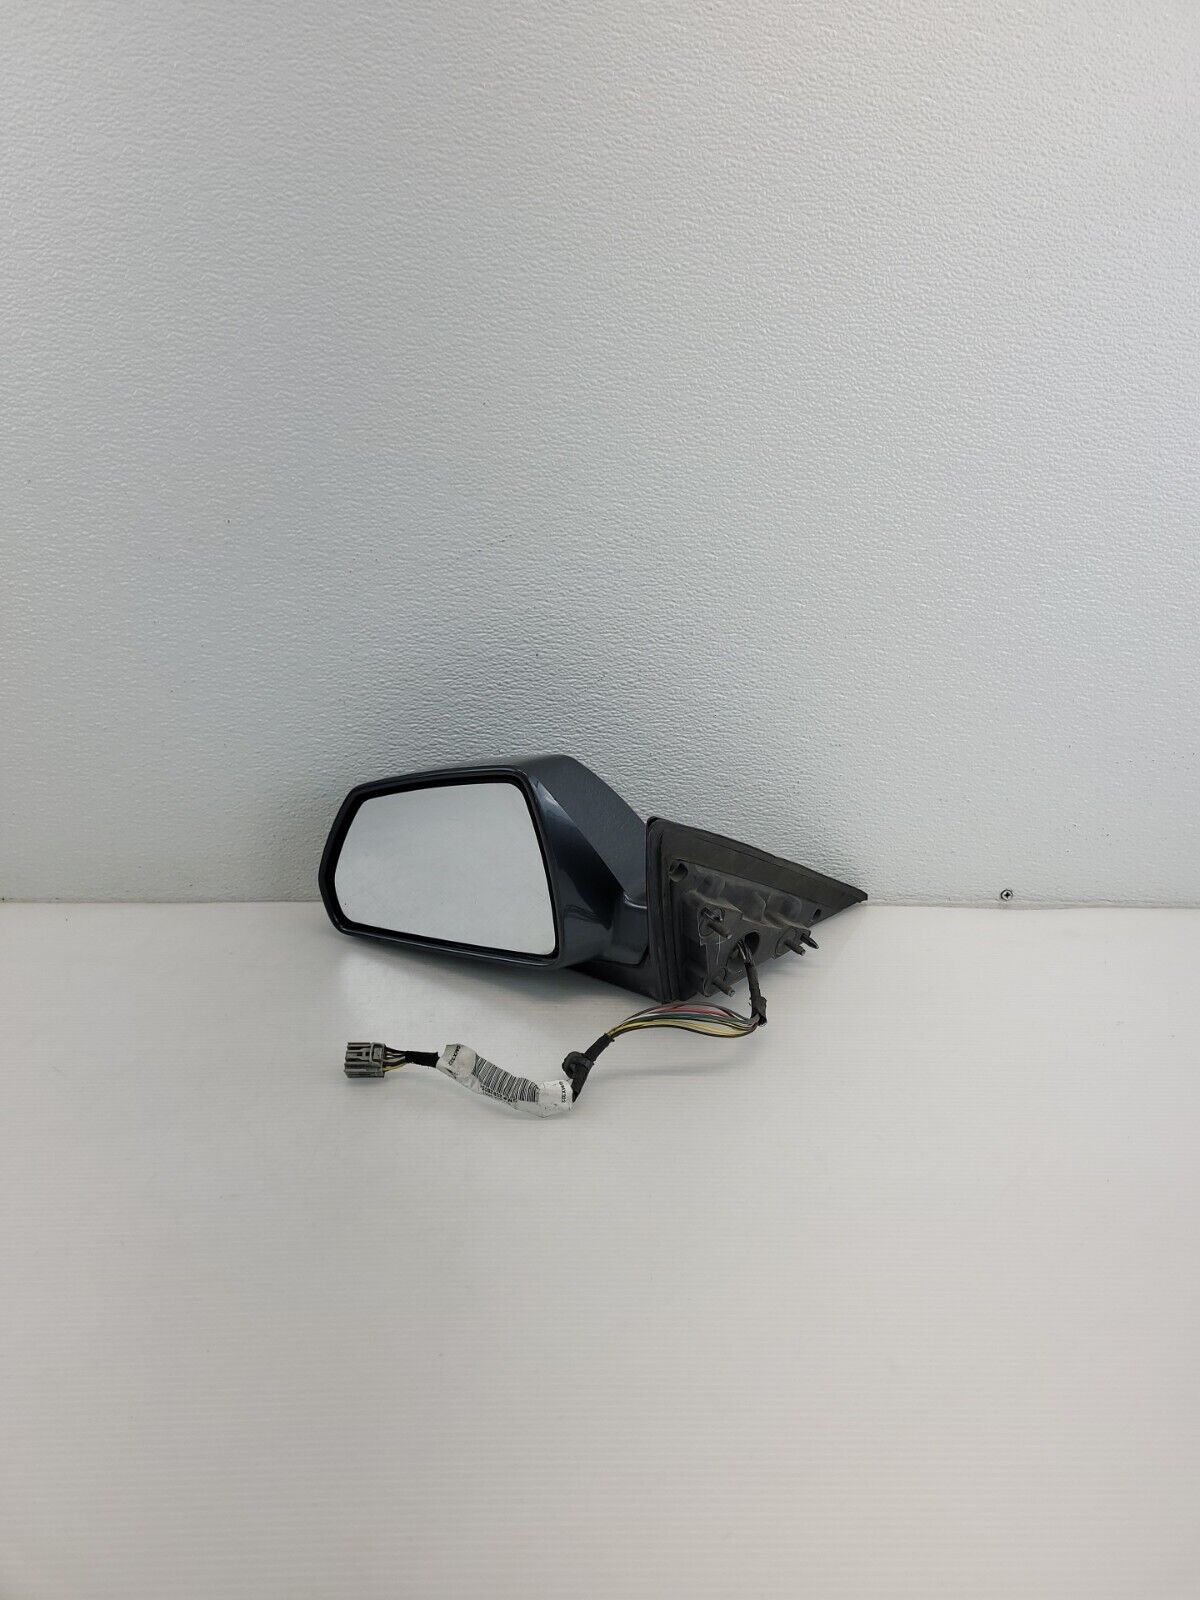 2008 - 2014 CADILLAC CTS DRIVER SIDE VIEW POWER DOOR MIRROR 25828054 OEM 08 - 14